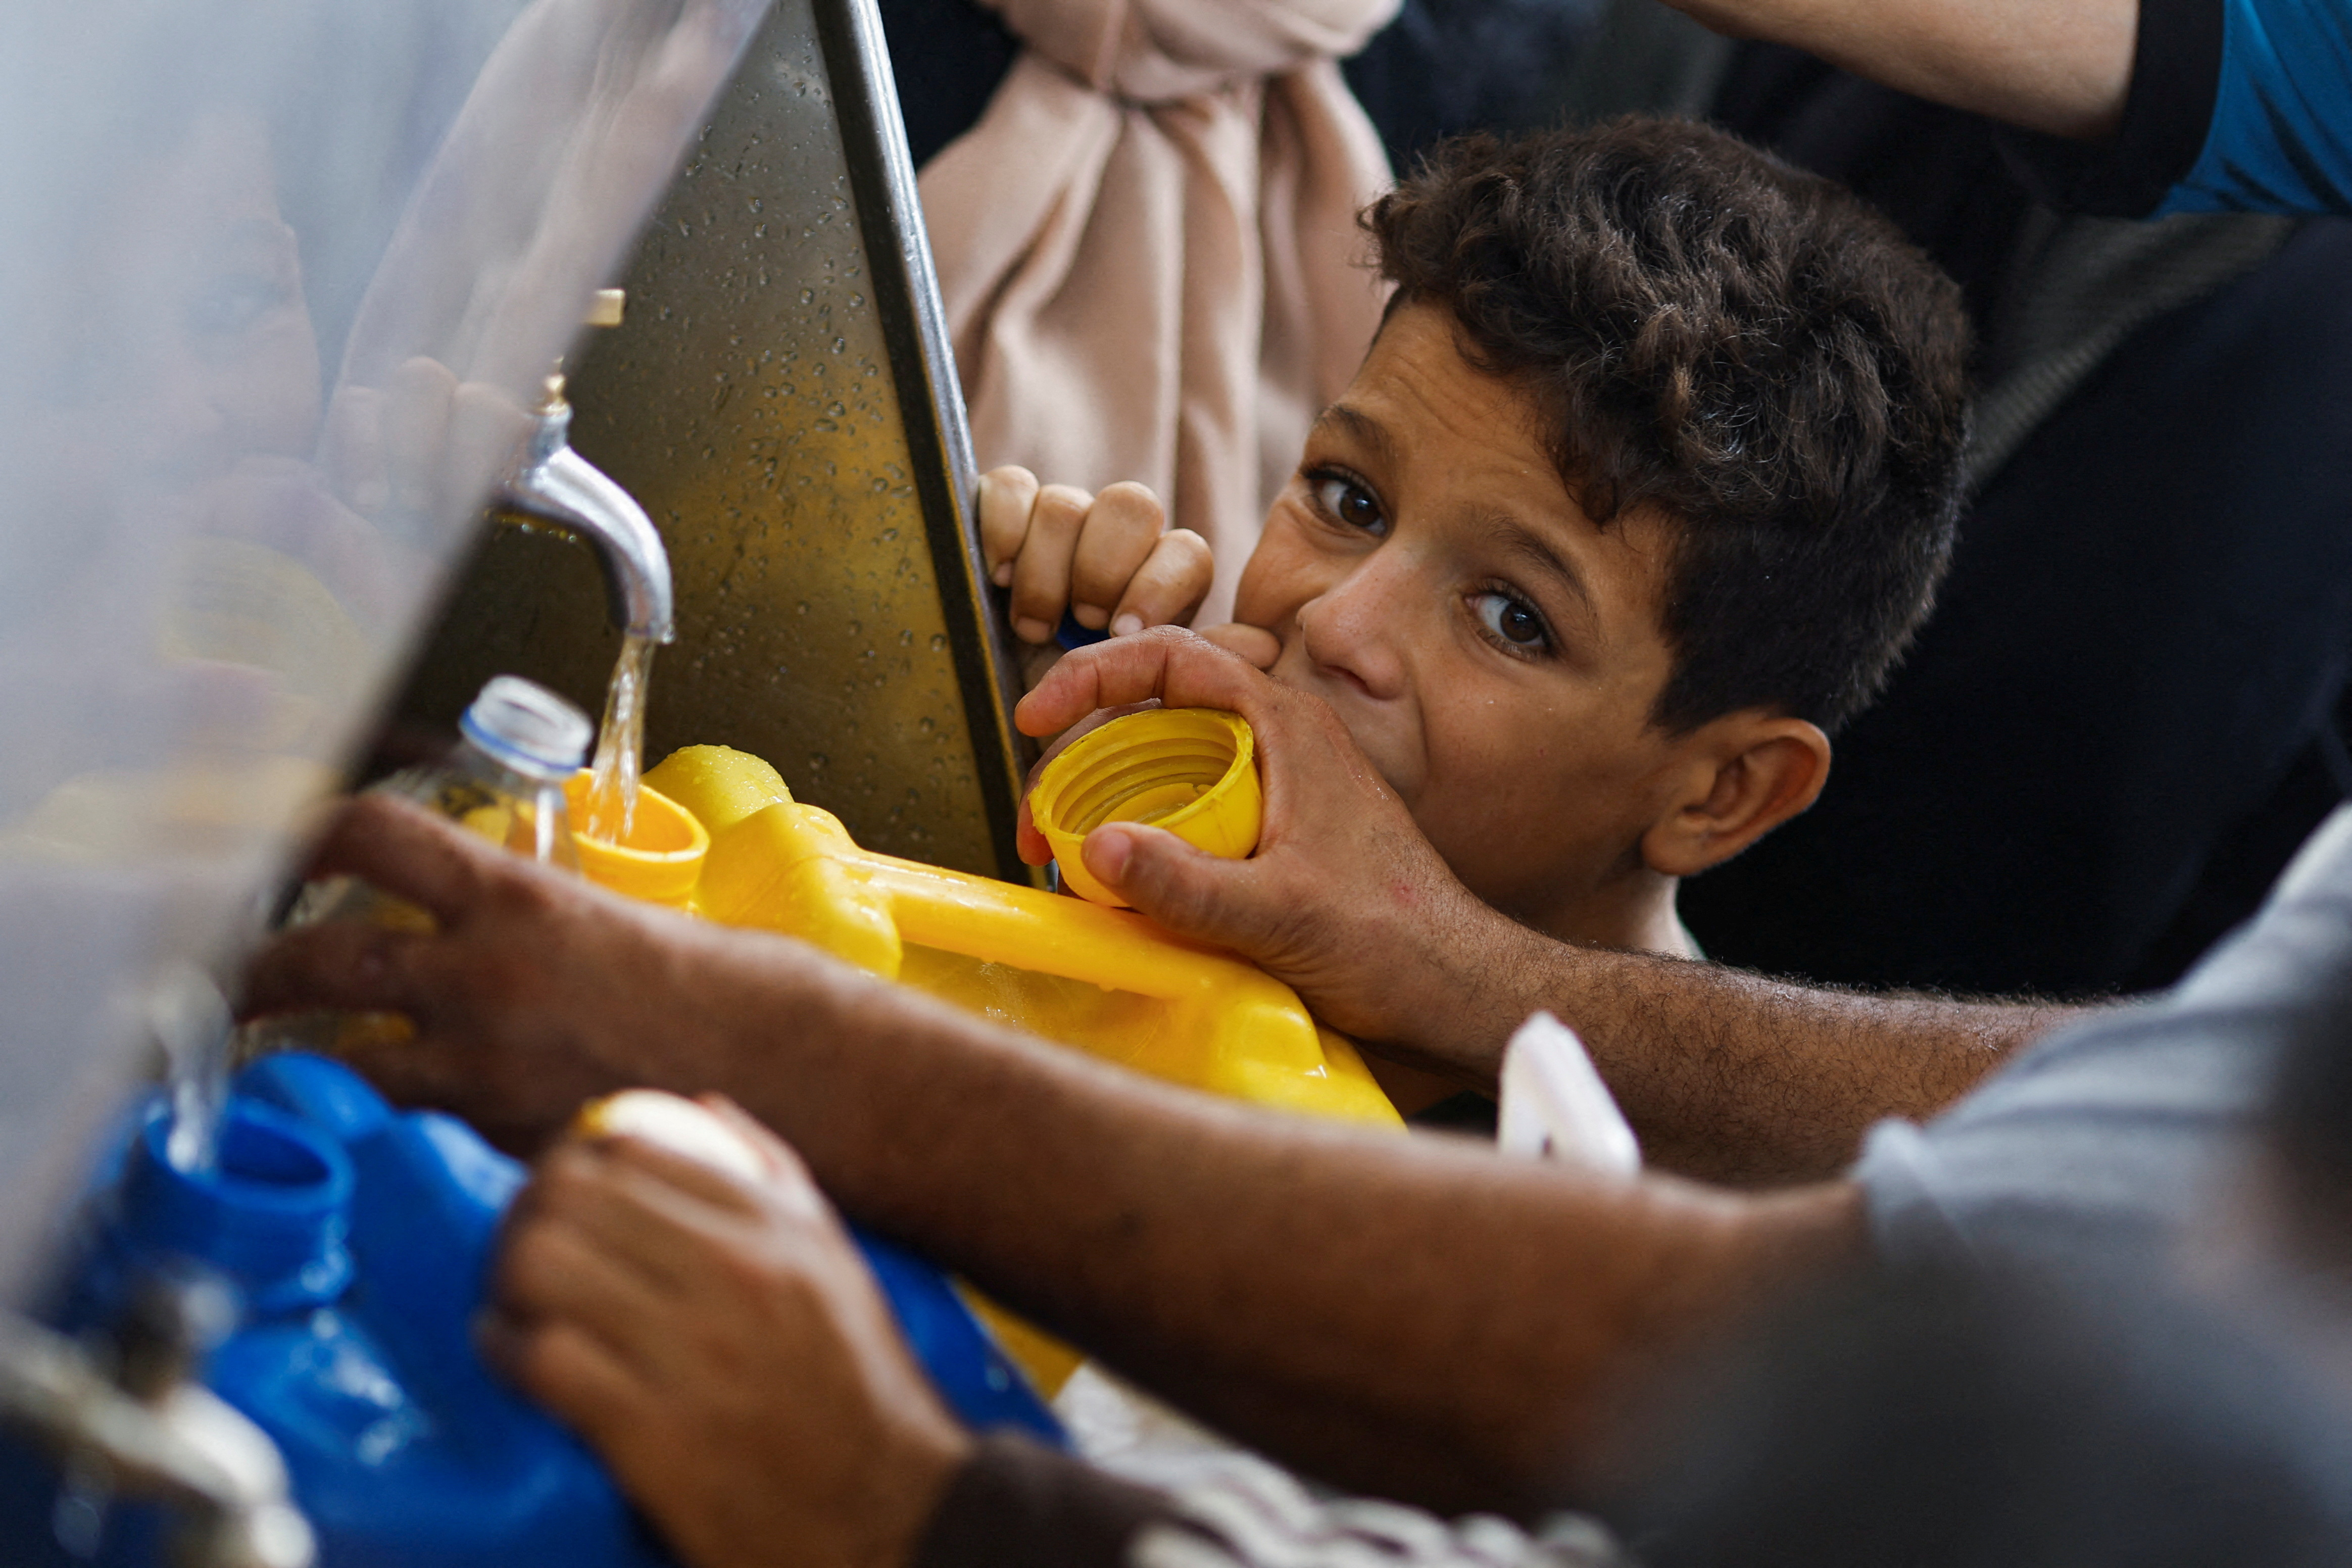 A child looks on as Palestinians gather to collect water amid water shortages, in Khan Younis